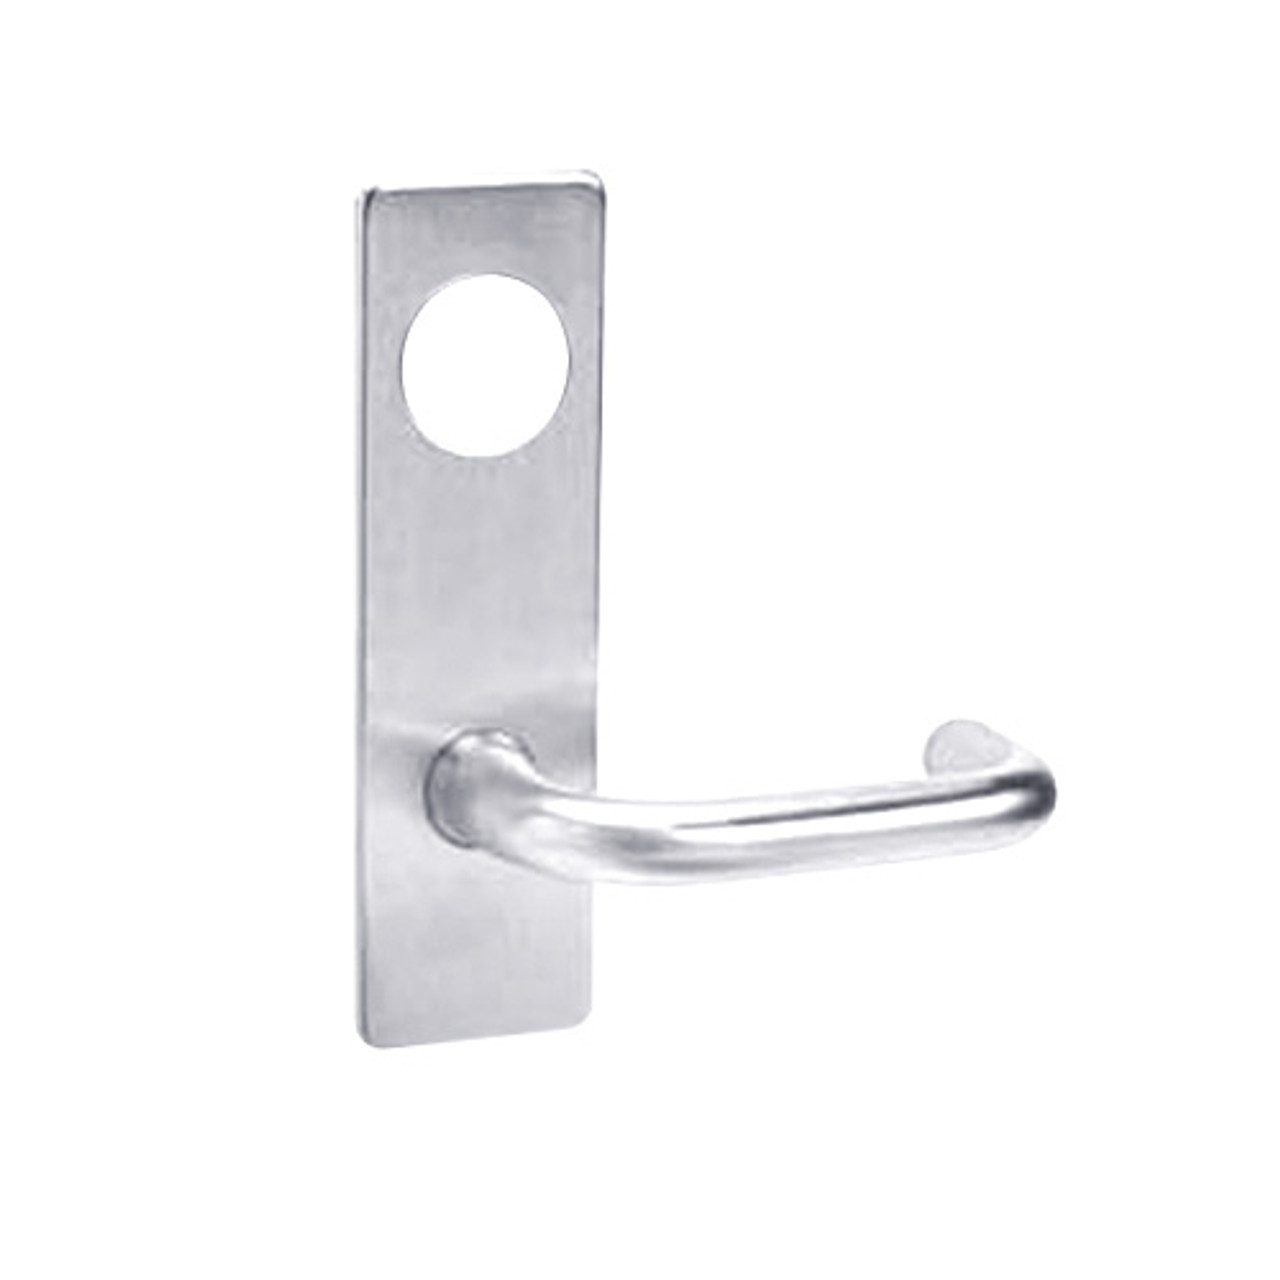 ML2055-LSM-625-M31 Corbin Russwin ML2000 Series Mortise Classroom Trim Pack with Lustra Lever in Bright Chrome